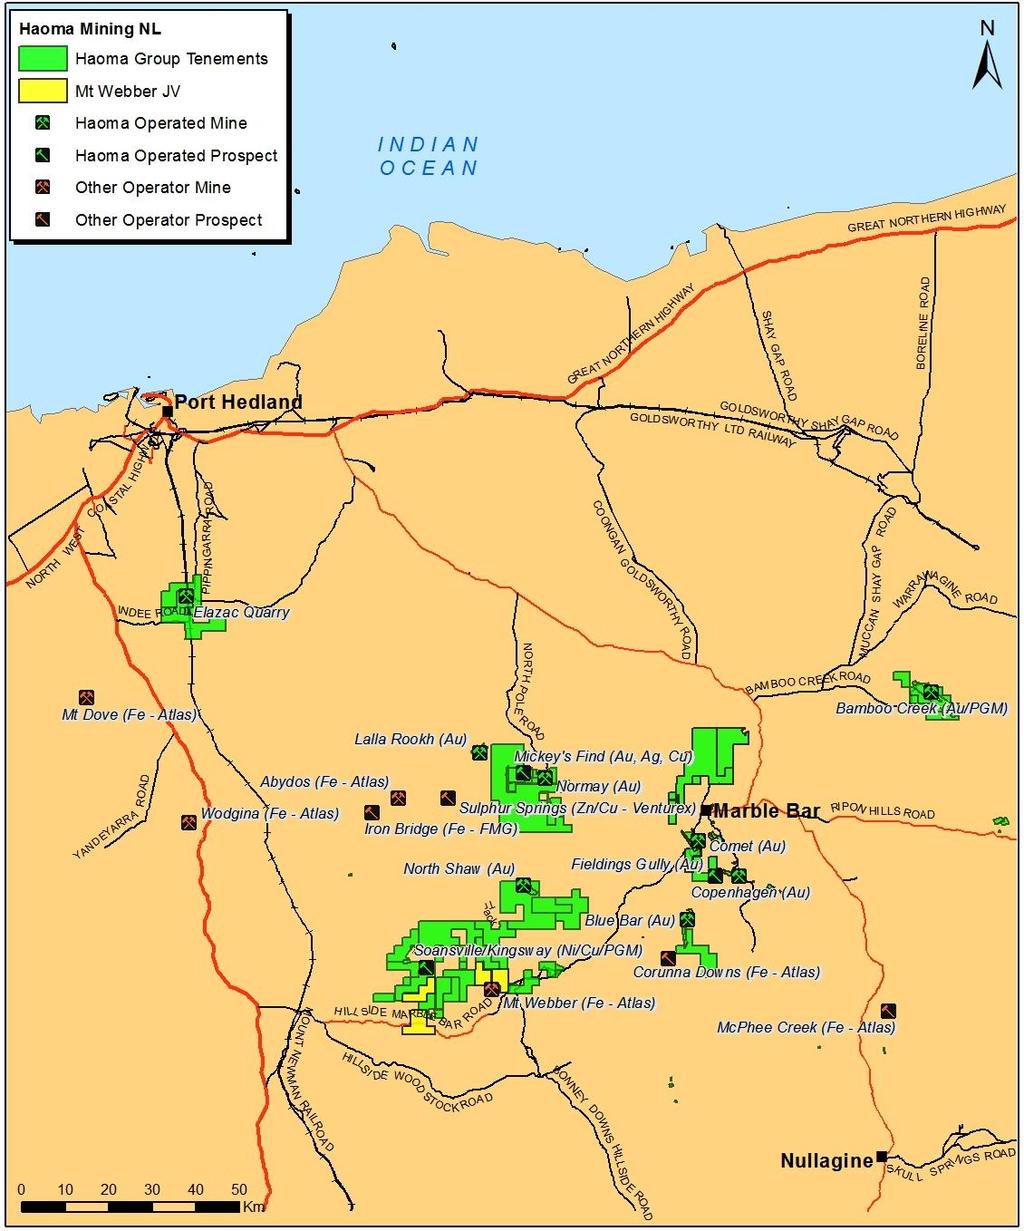 Figure 1: Location map of Haoma Mining and other Pilbara mining locations Competent Person Statement The information in this report that relates to Exploration Results is based on information